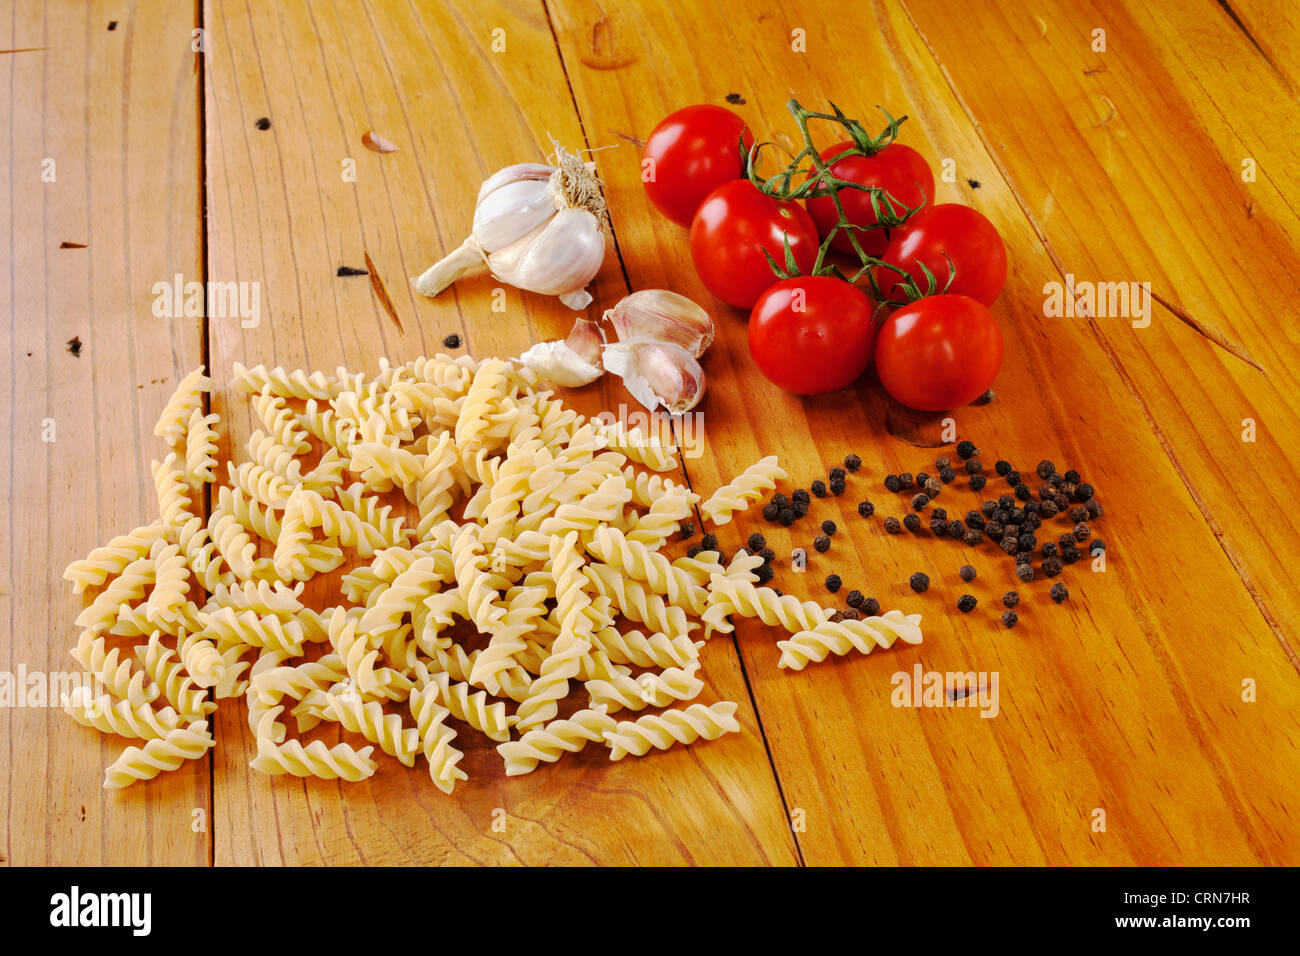 Uncooked fusili pasta with truss tomatoes, garlic and black peppercorns, on an old wooden kitchen table. Stock Photo